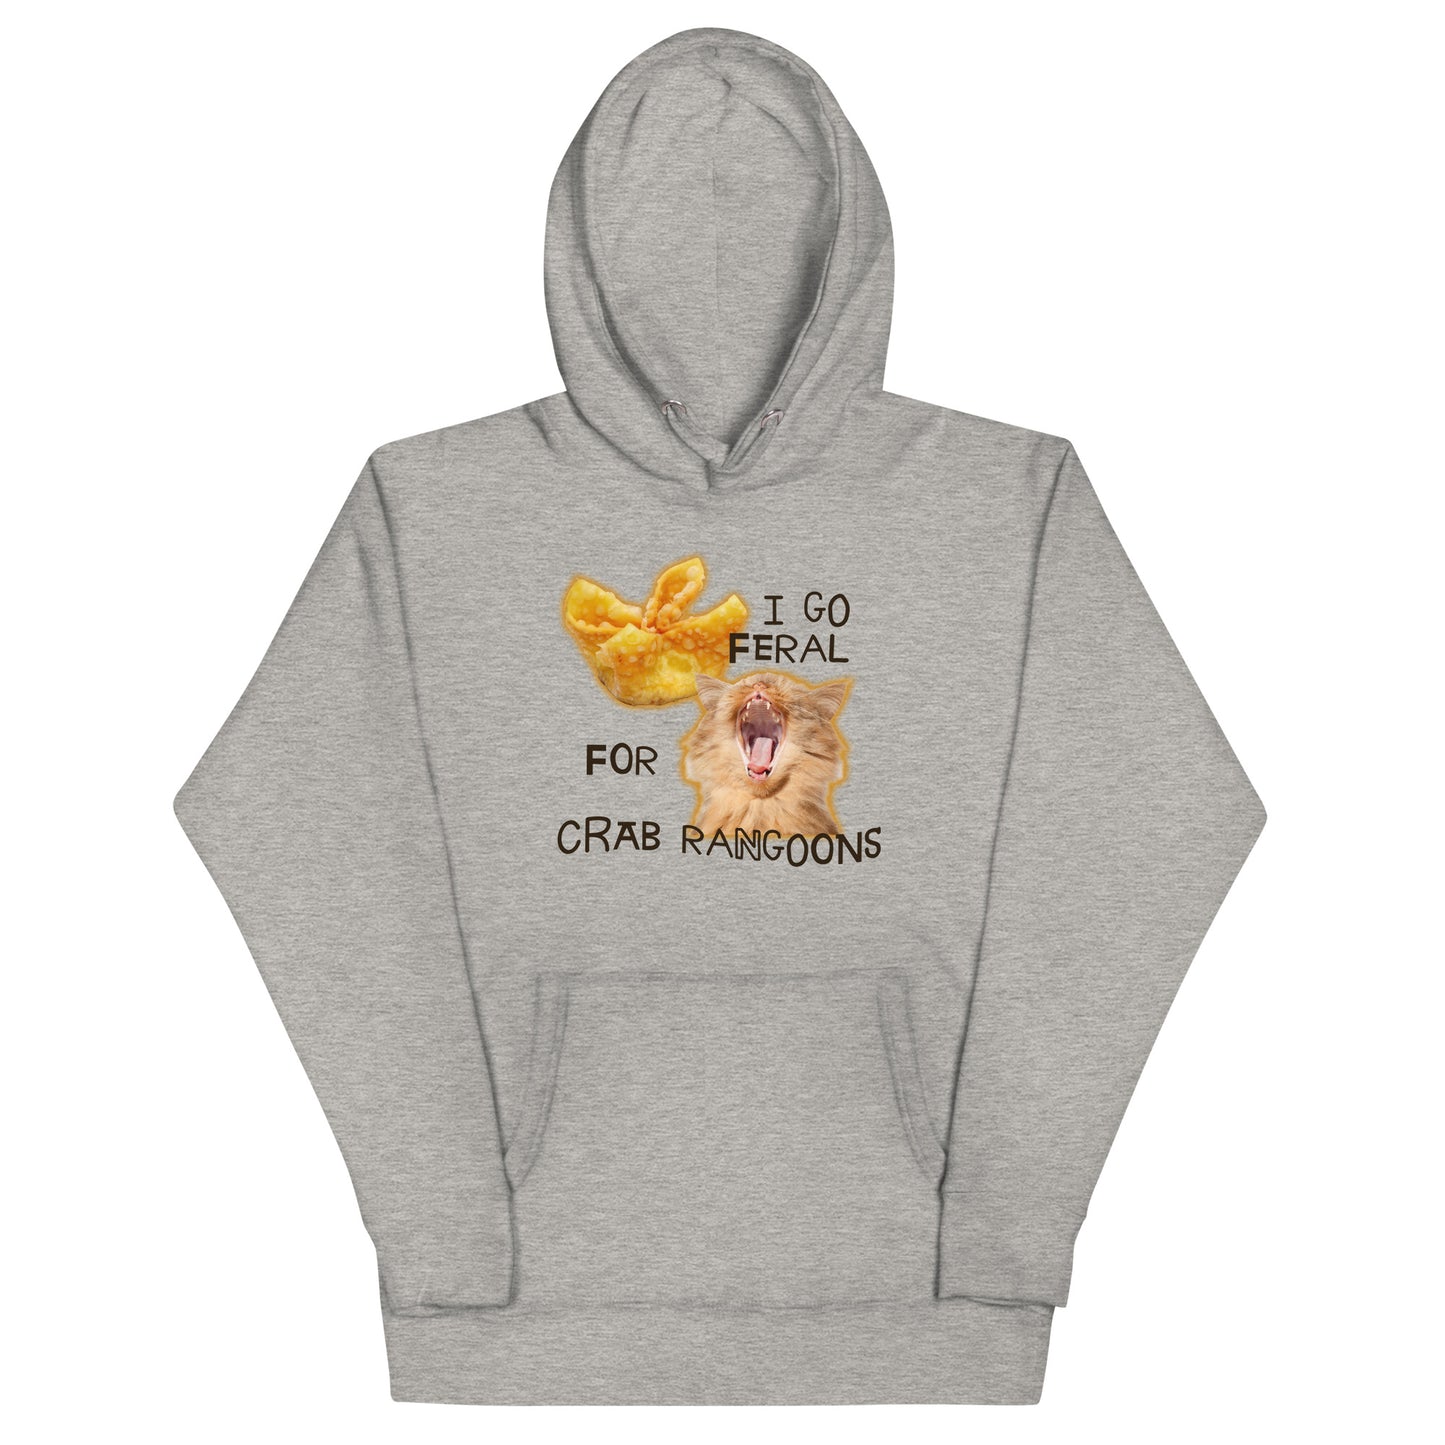 I Go Feral for Crab Rangoons Unisex Hoodie